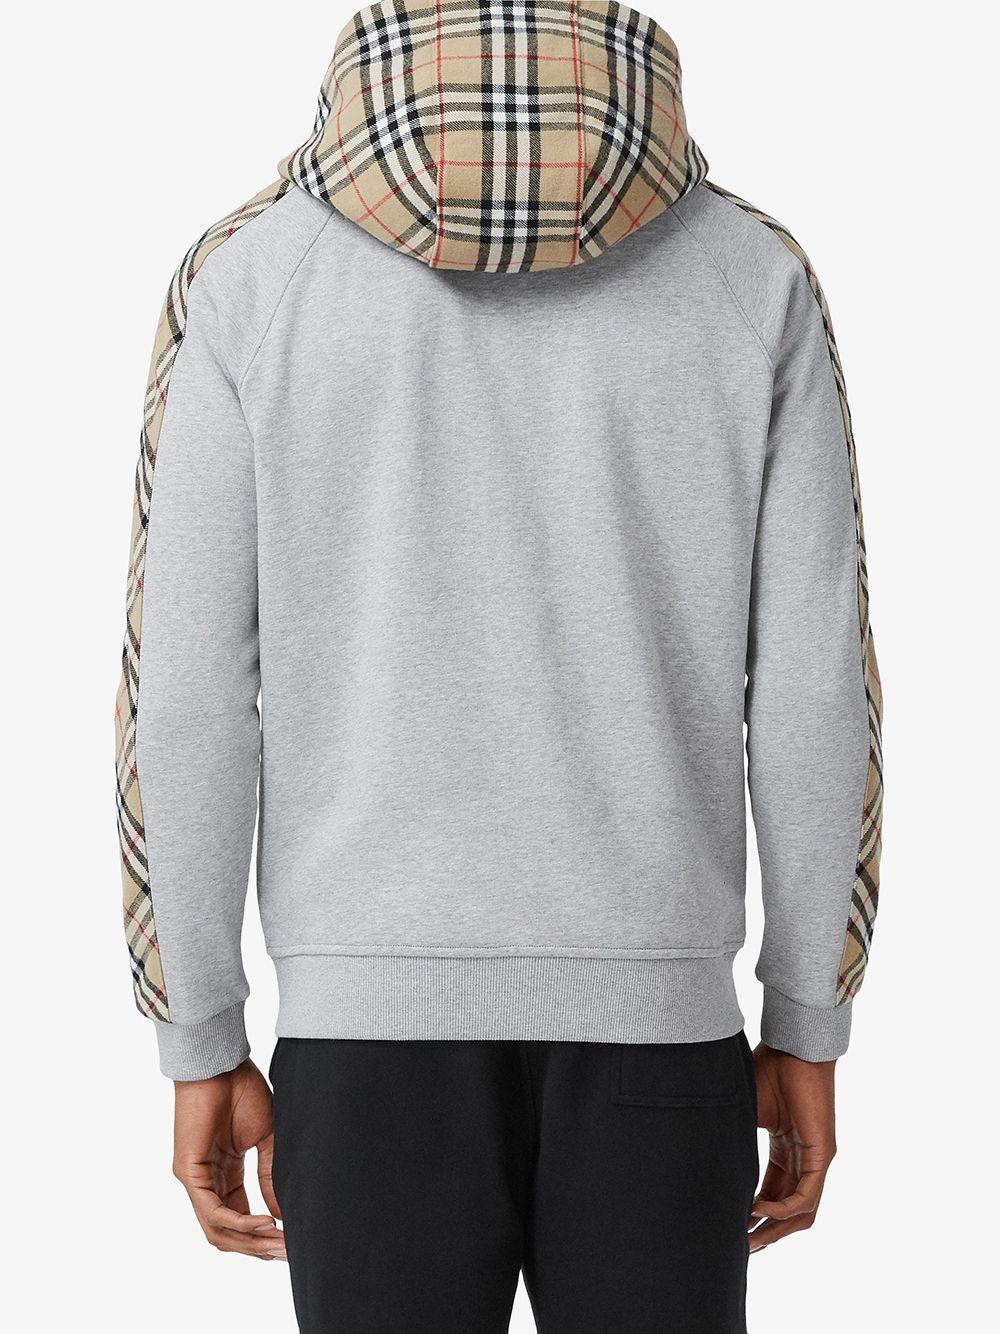 Burberry Vintage Check Panel Zipped Hoodie in Gray for Men | Lyst